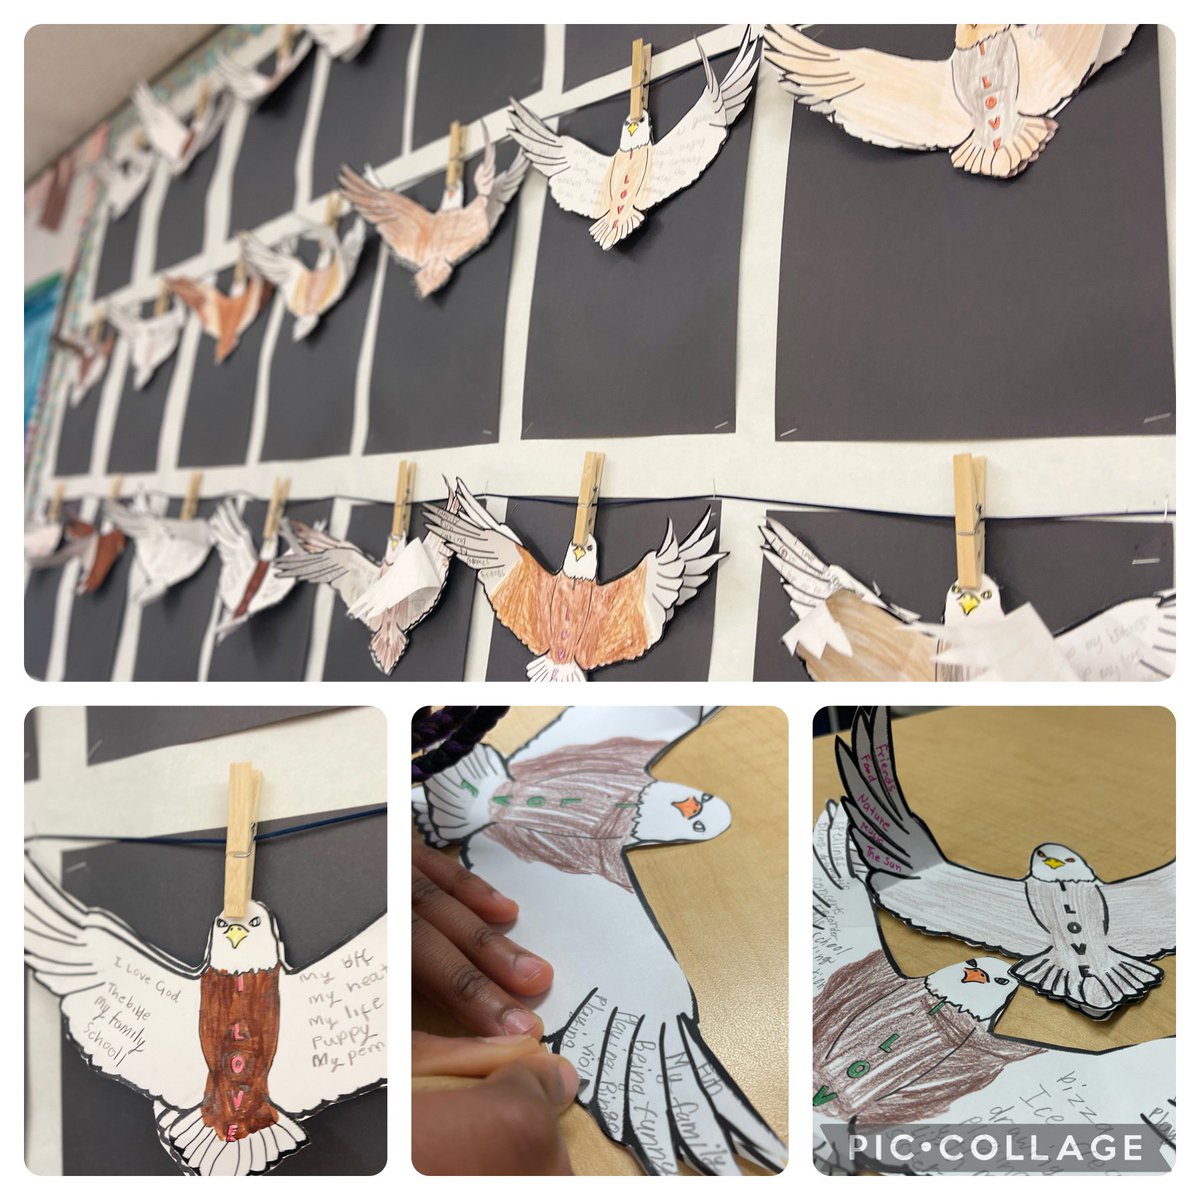 'Today, students delved into the profound teachings of Indigenous perspectives, focusing on Love symbolized by the majestic Eagle. It was a touching experience as they shared their thoughts on what Love truly means. @stgeorgeLRSD #EagleKnights❤️🦅 #IndigenousWisdom